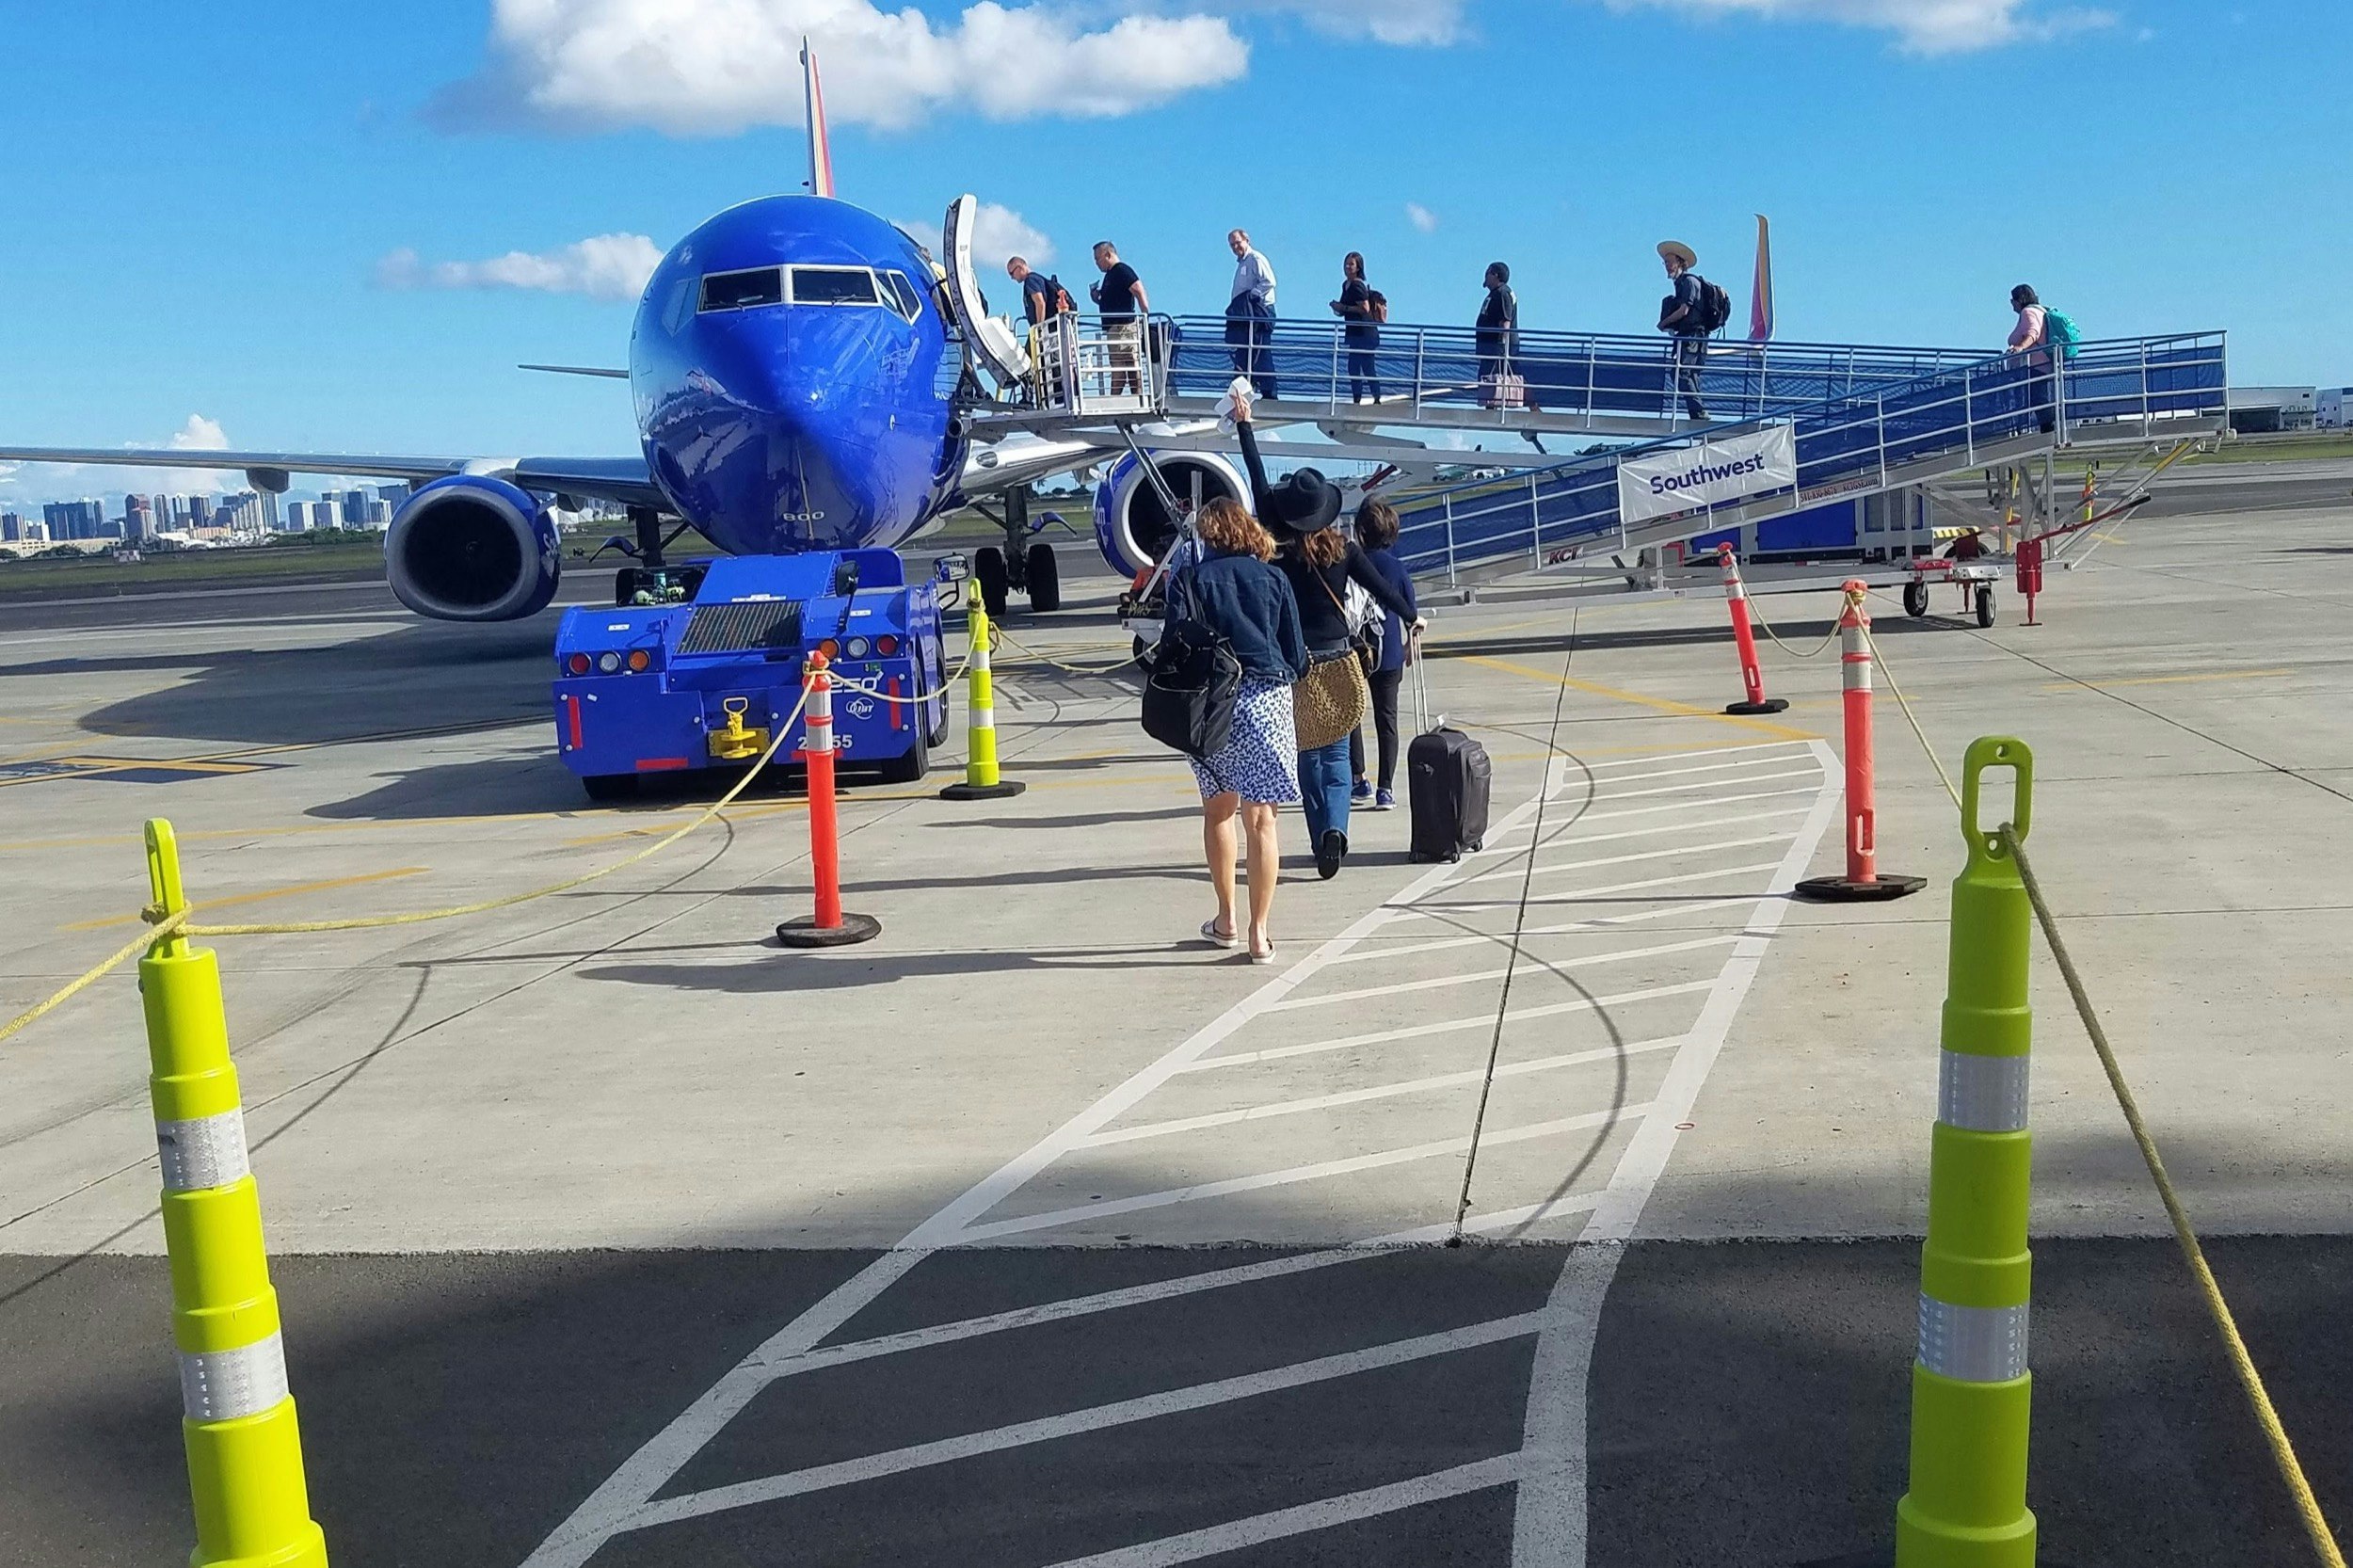 Using old-fashioned ramps that are exposed to the elements, passengers board a Southwest Airlines flight in a remote area of Honolulu’s Inouye International Airport. 